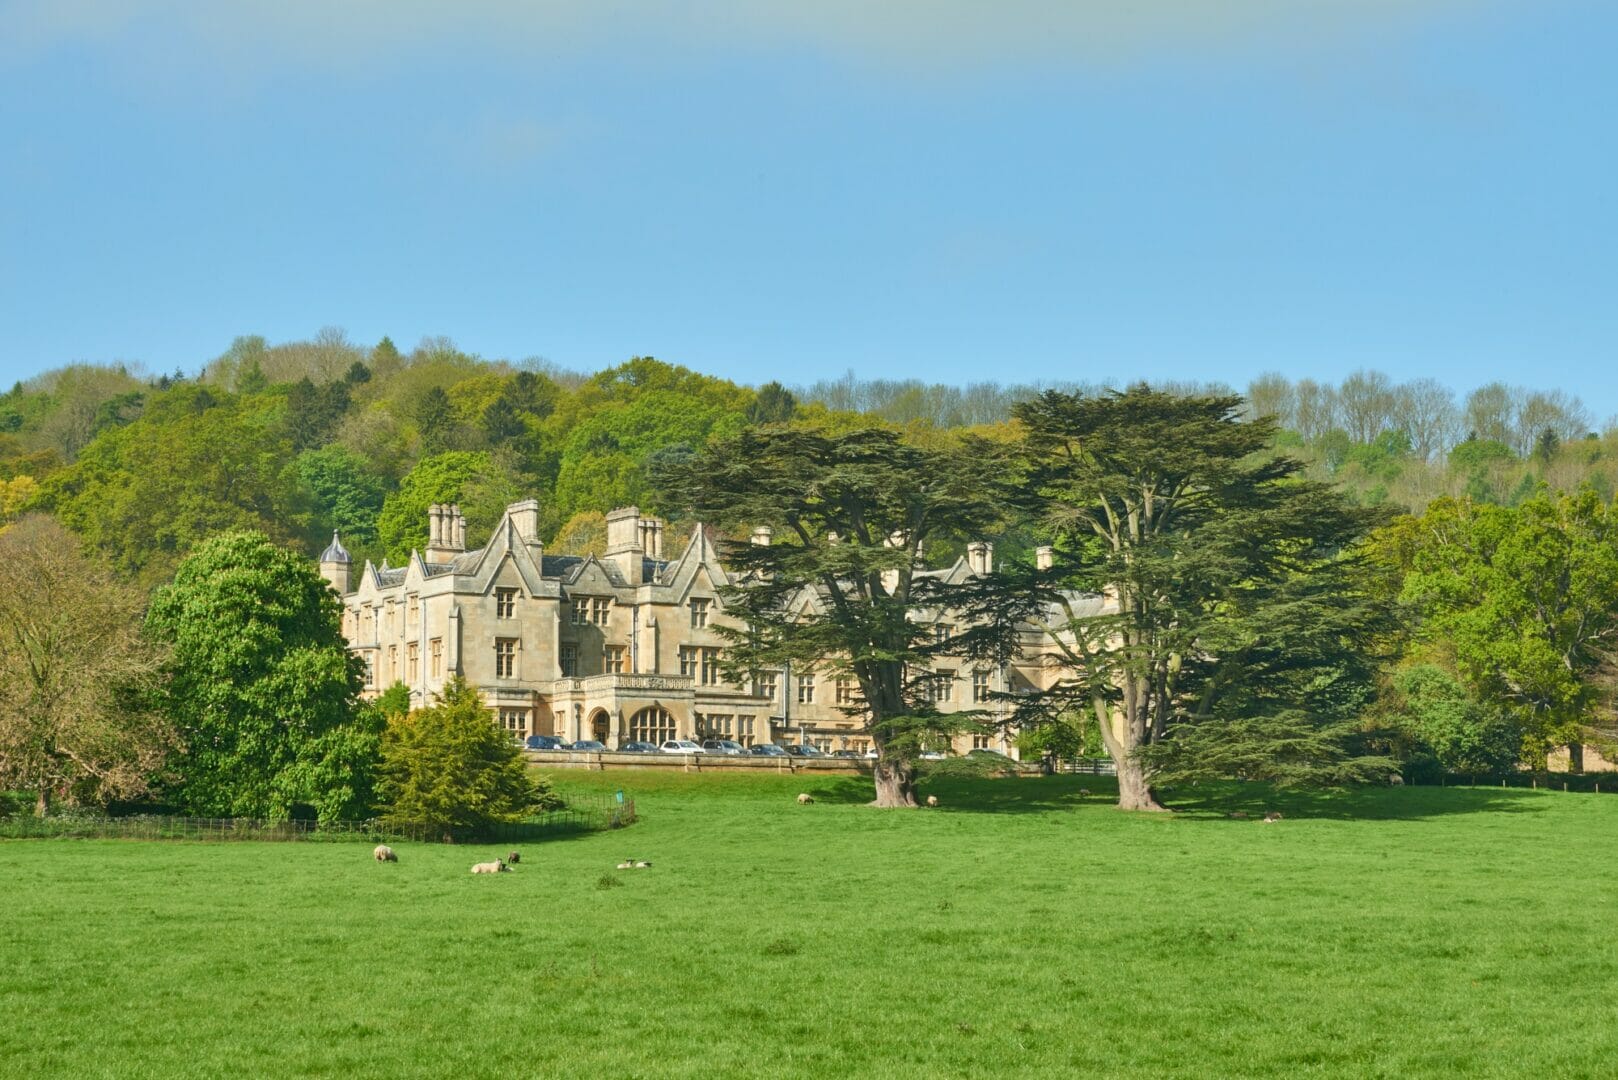 Bespoke Hotels appointed to manage recently sold Dumbleton Hall